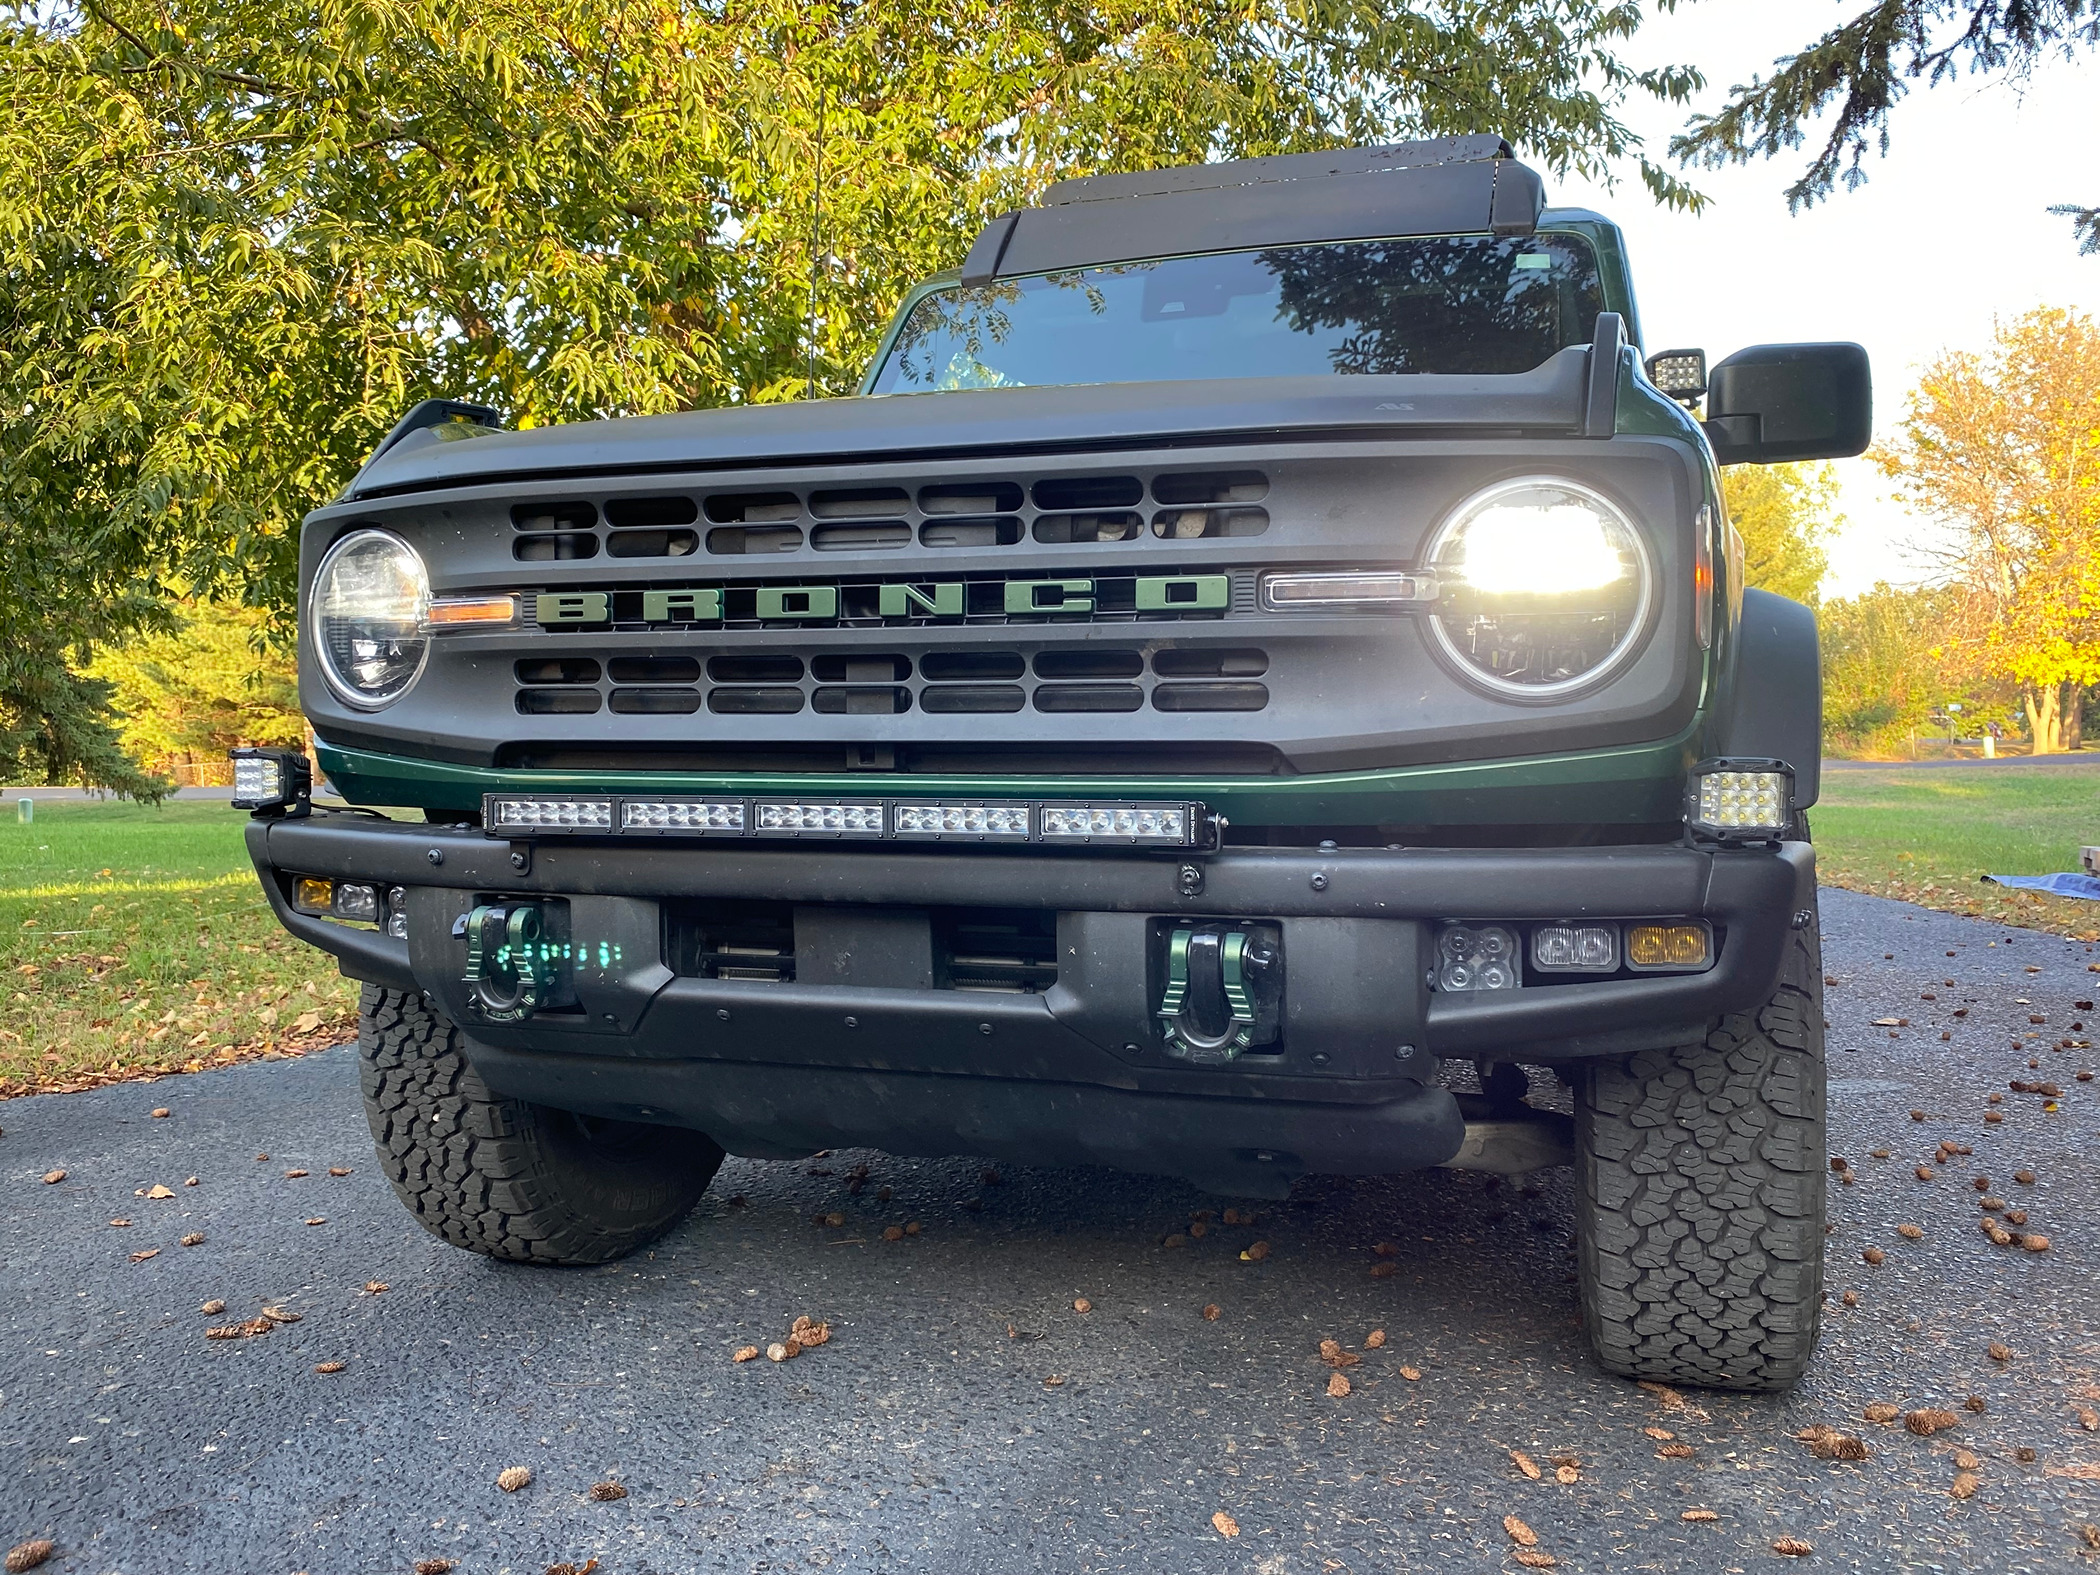 Ford Bronco 2x1 Tuesday! Let's see those before & after photos. day3